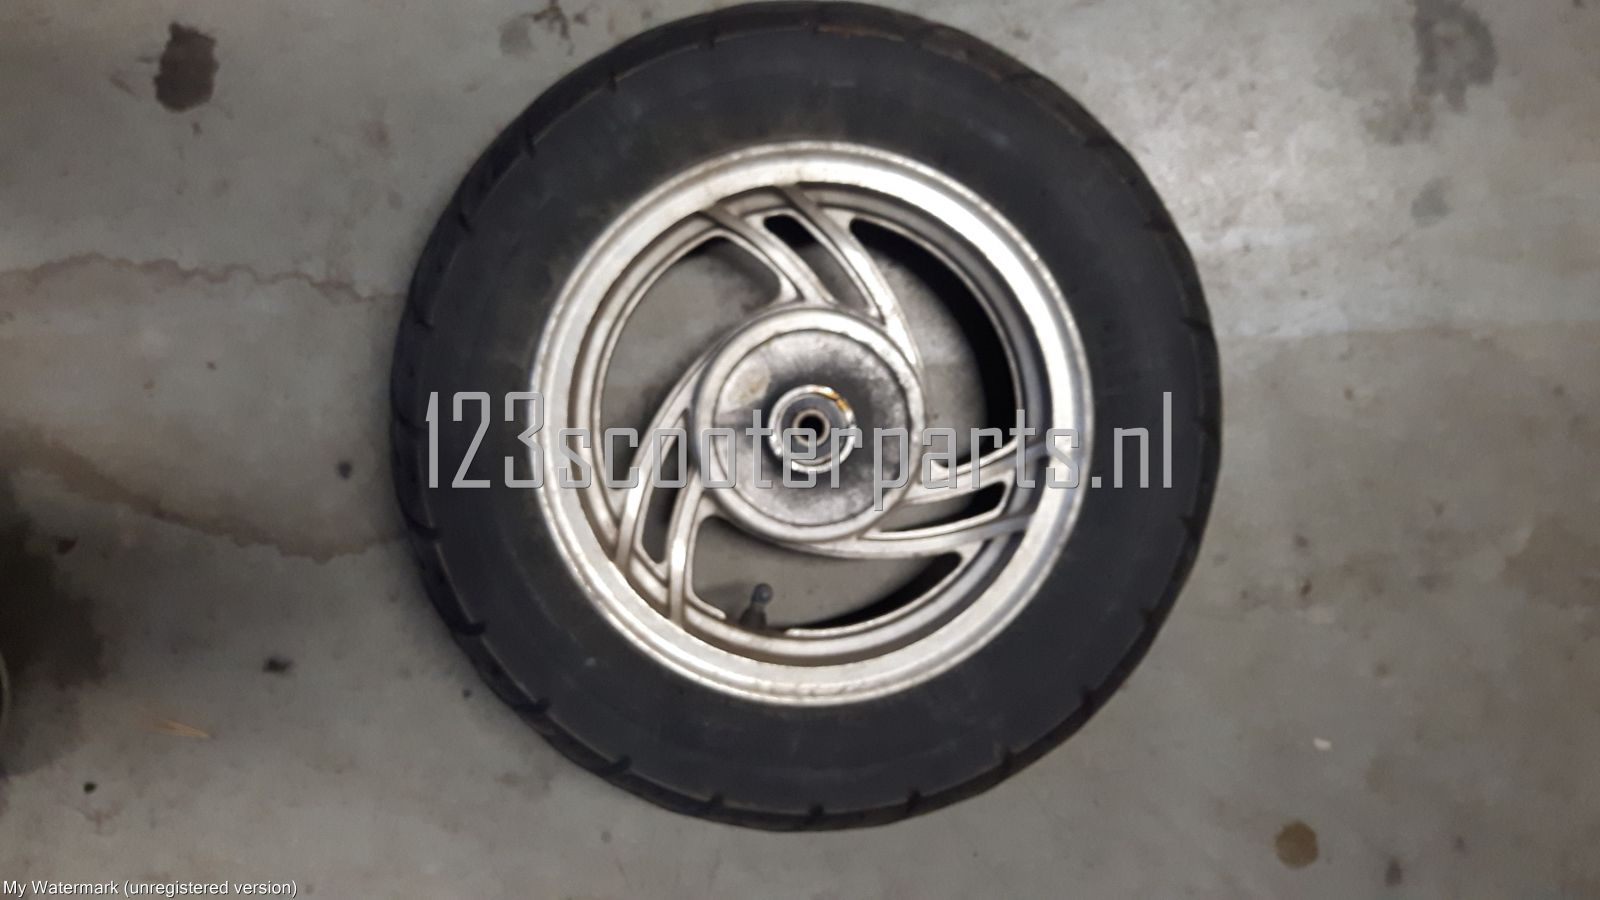 Peugeot V-clic front wheel and tire